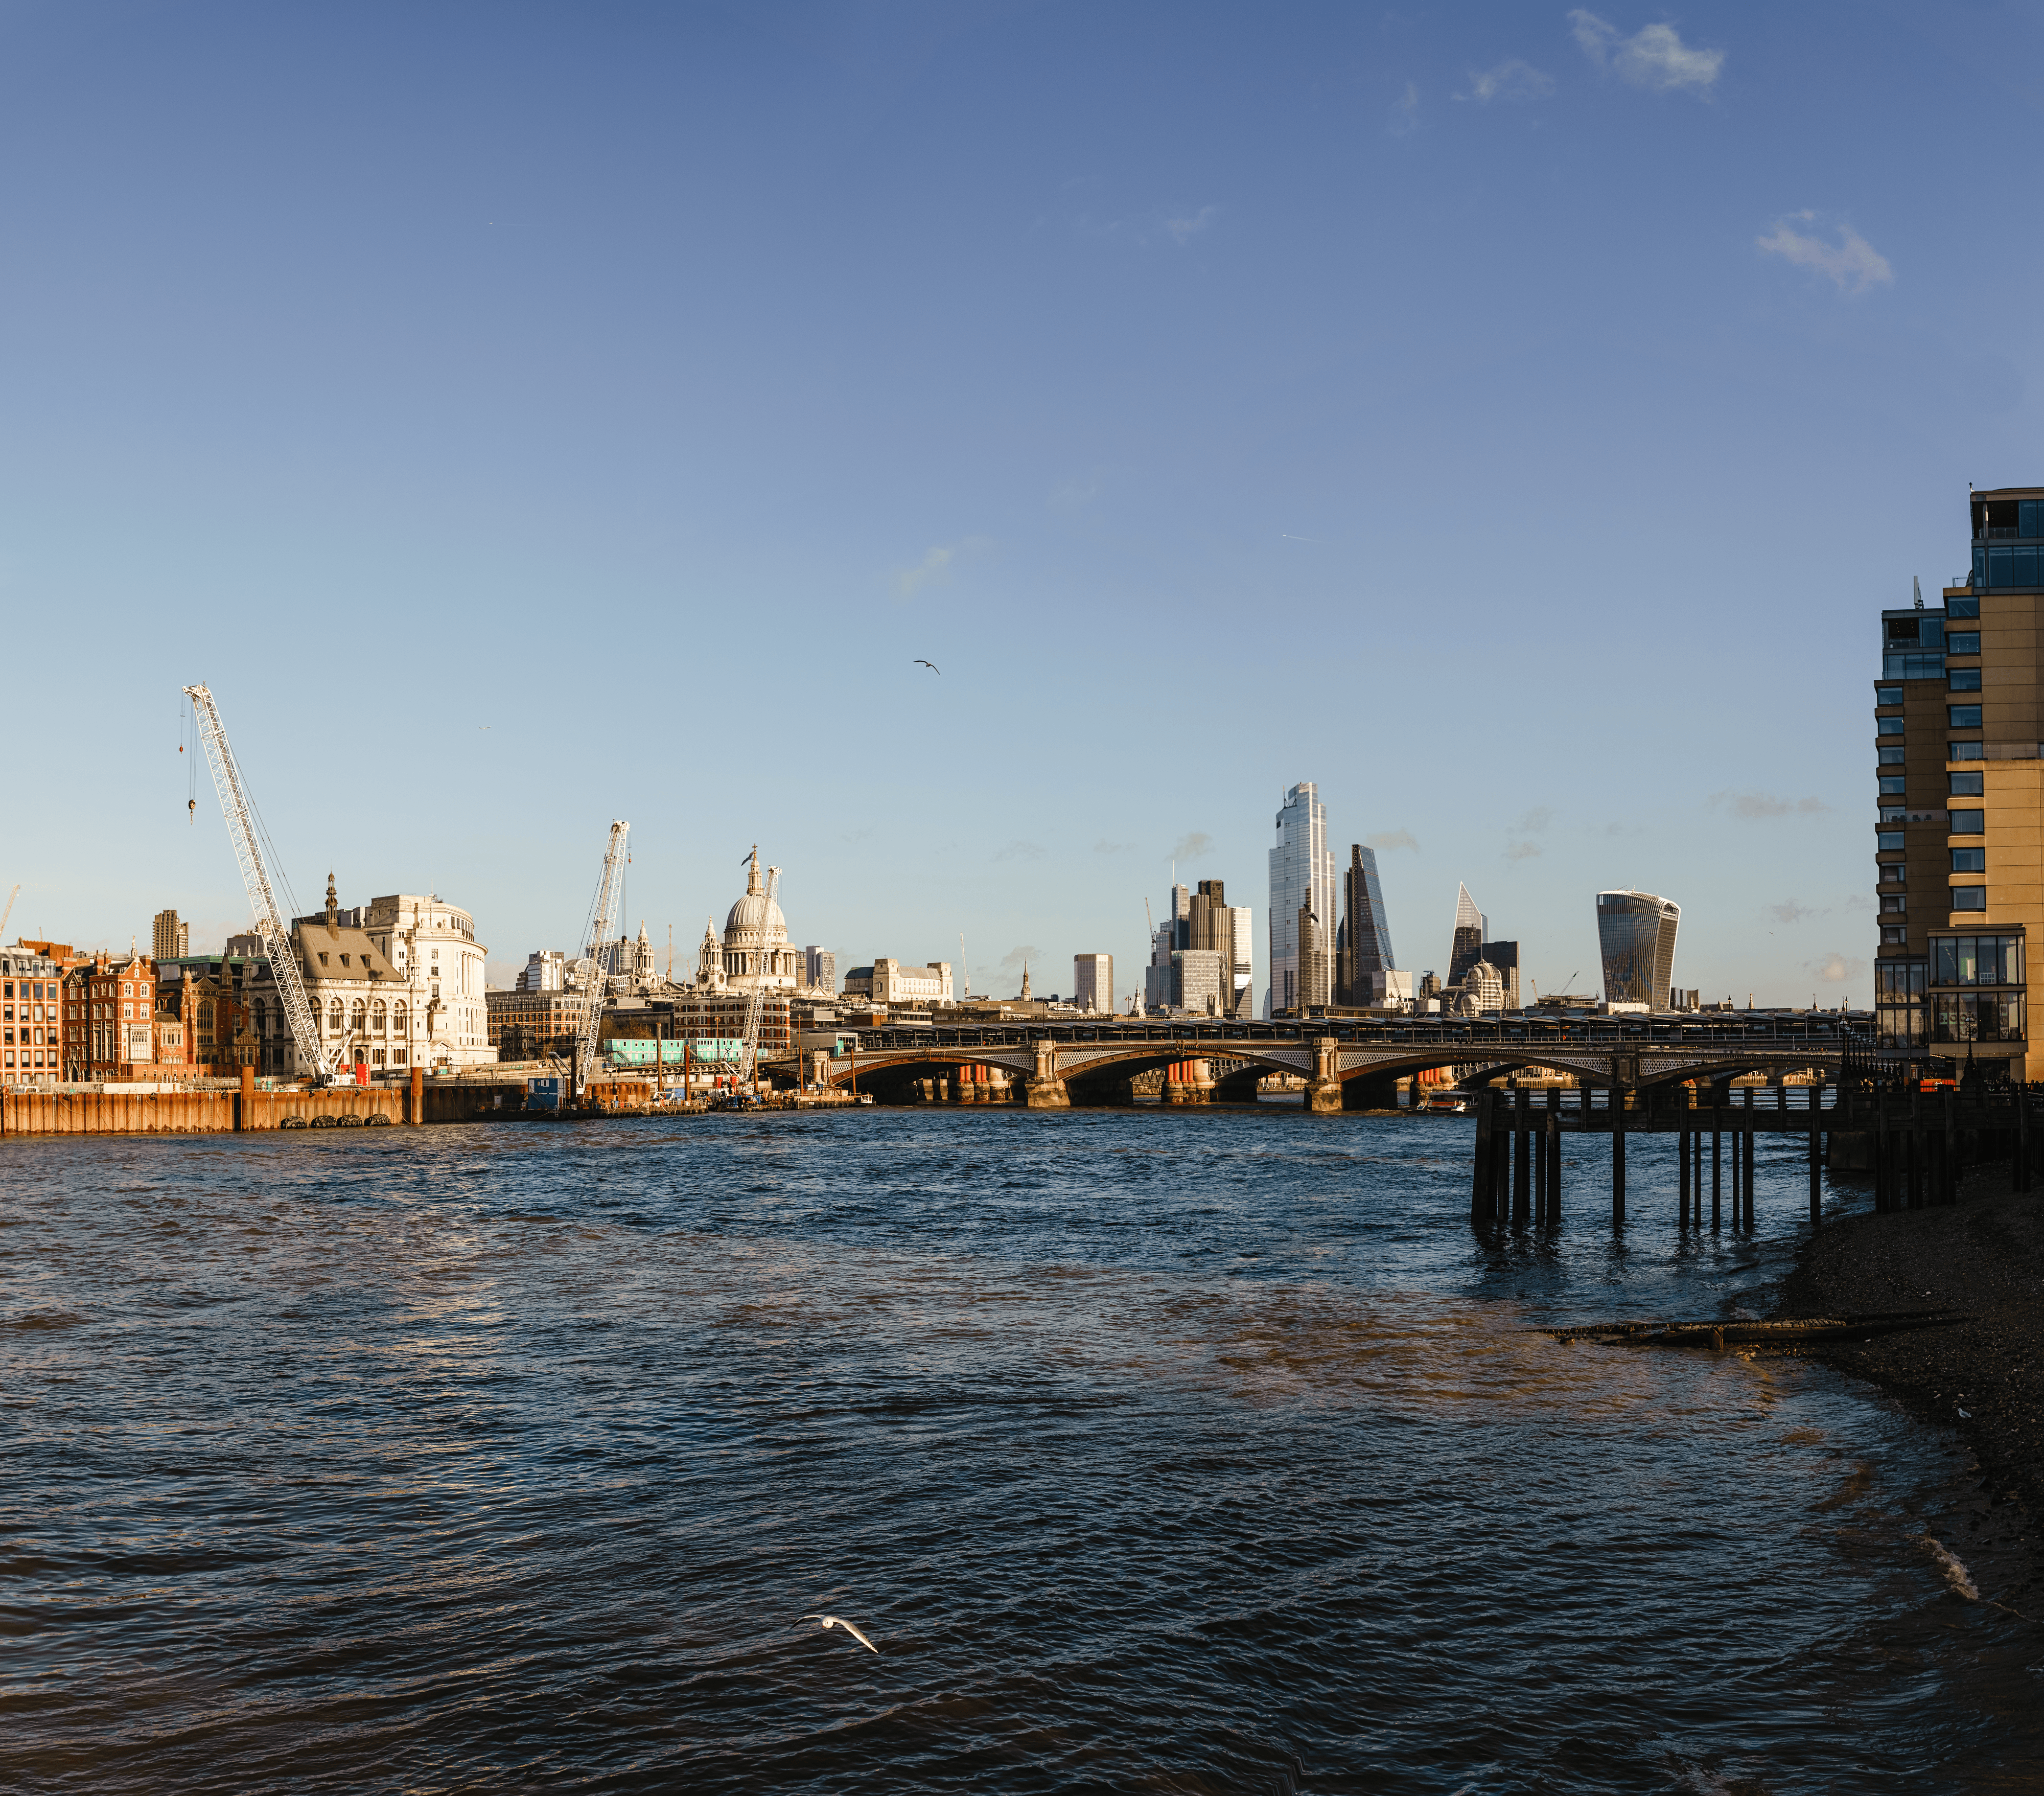 View on the Thames River